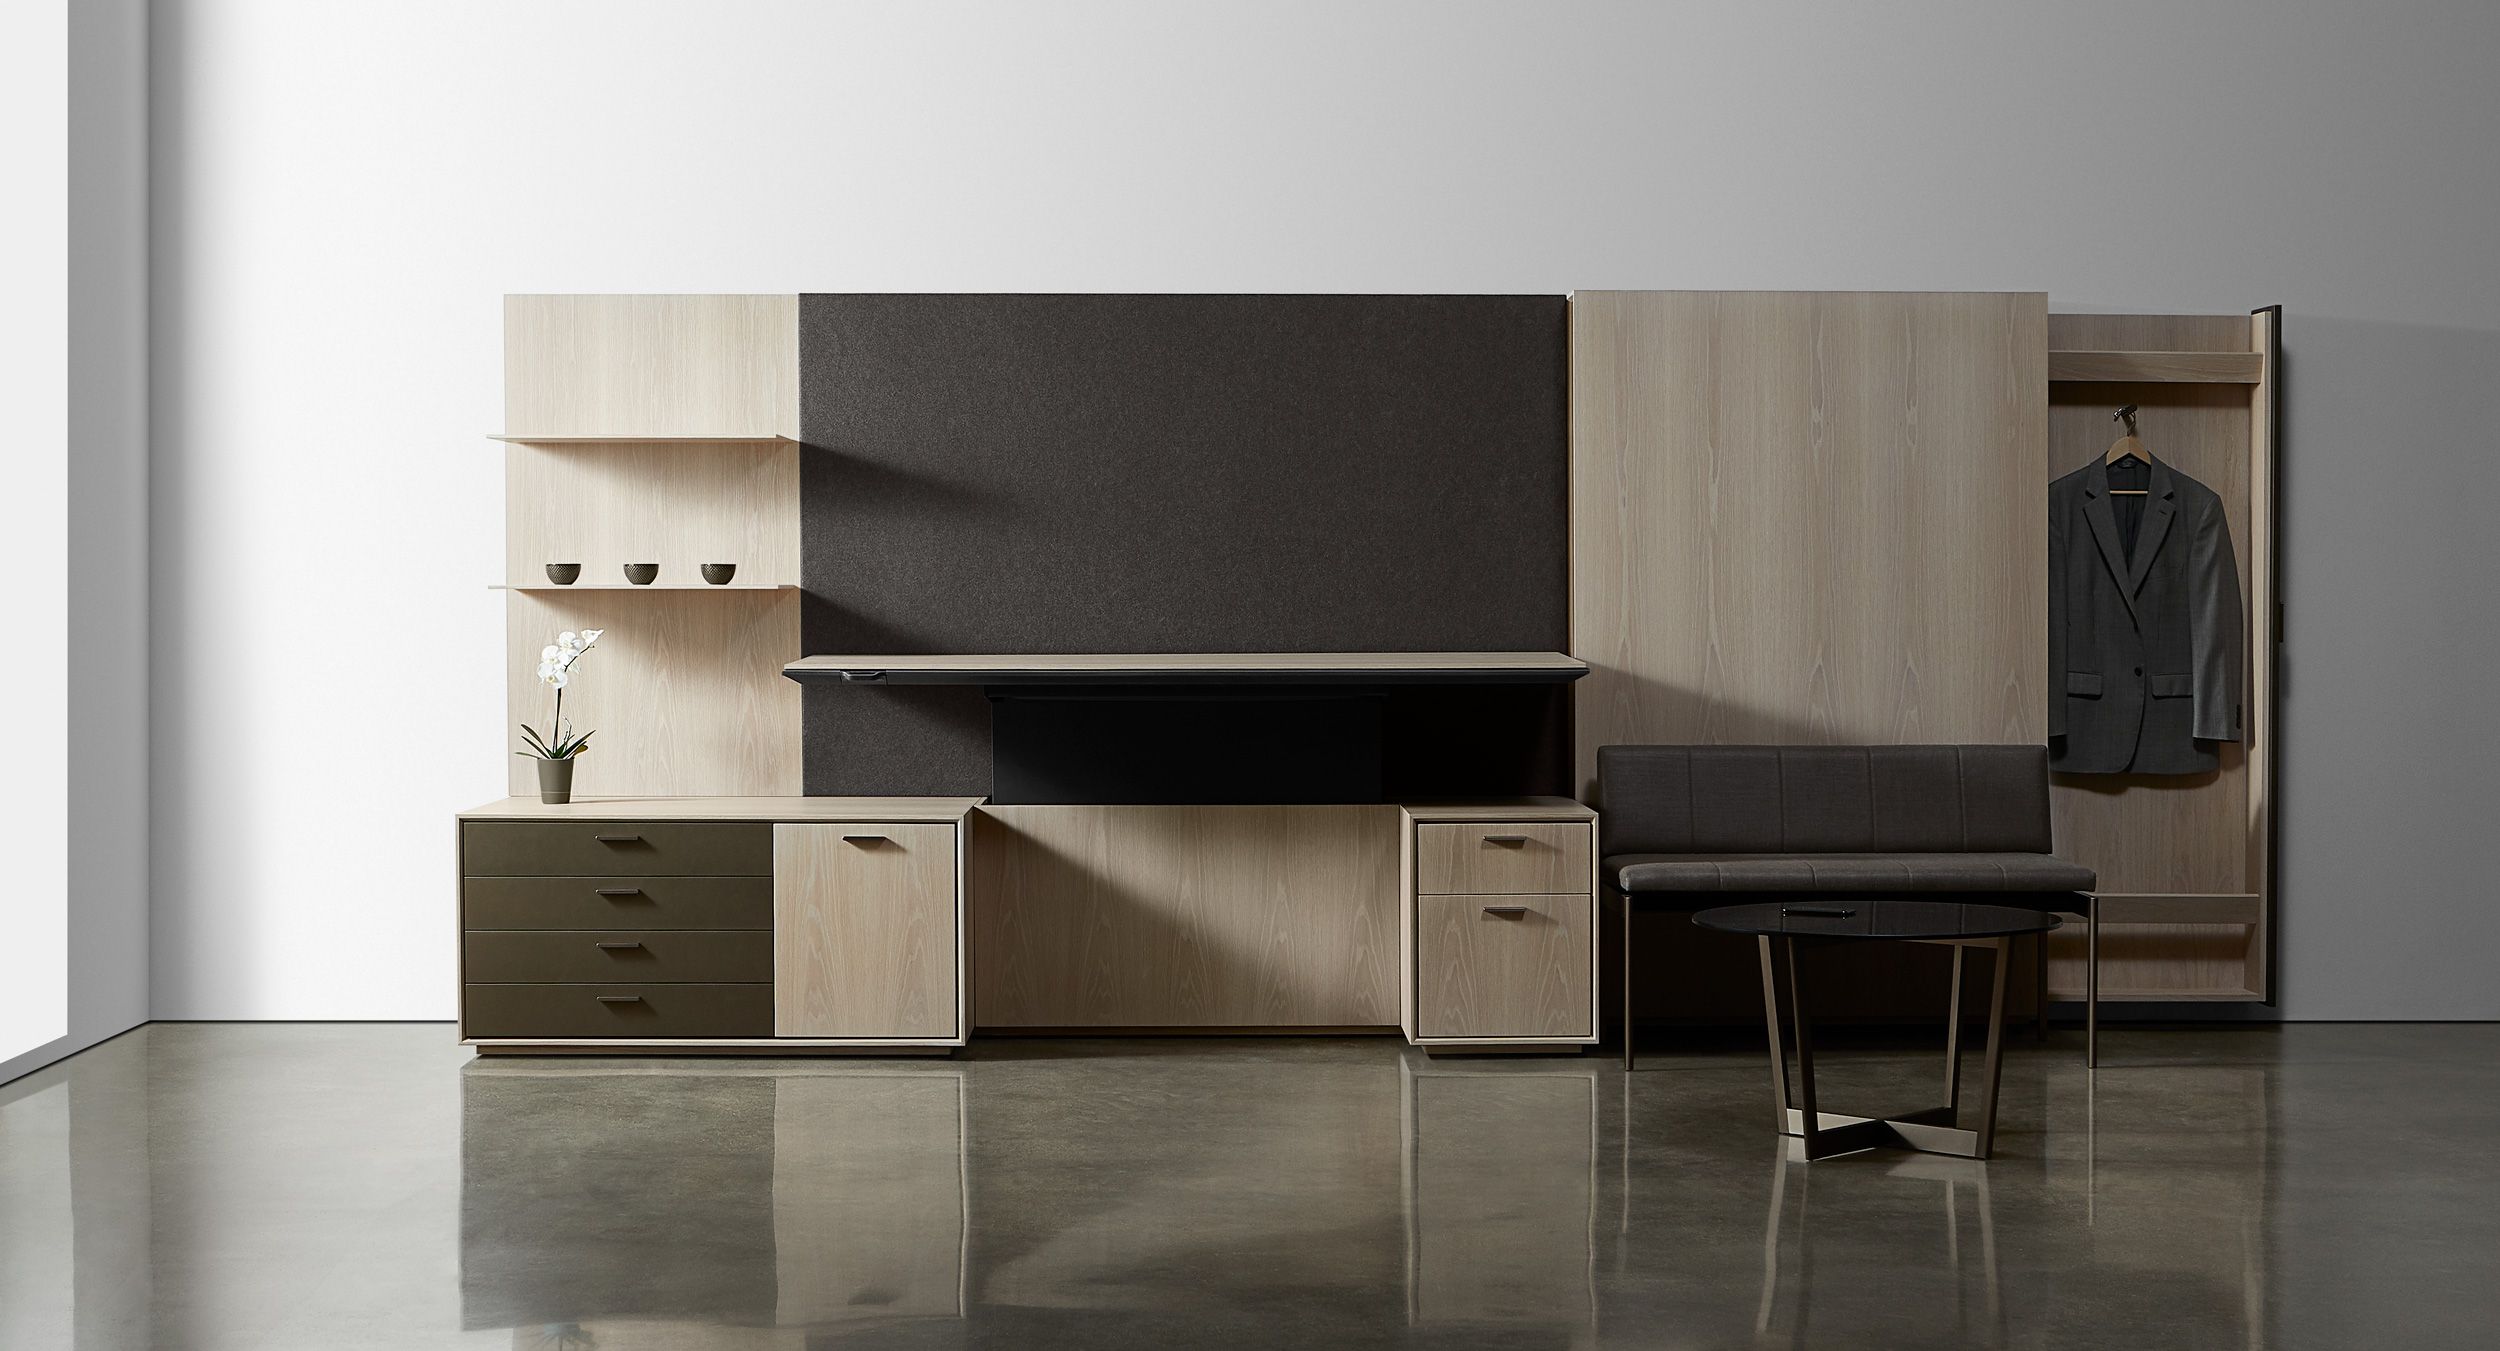 HALO's clean lines conceal an abundance of thoughtful storage options.